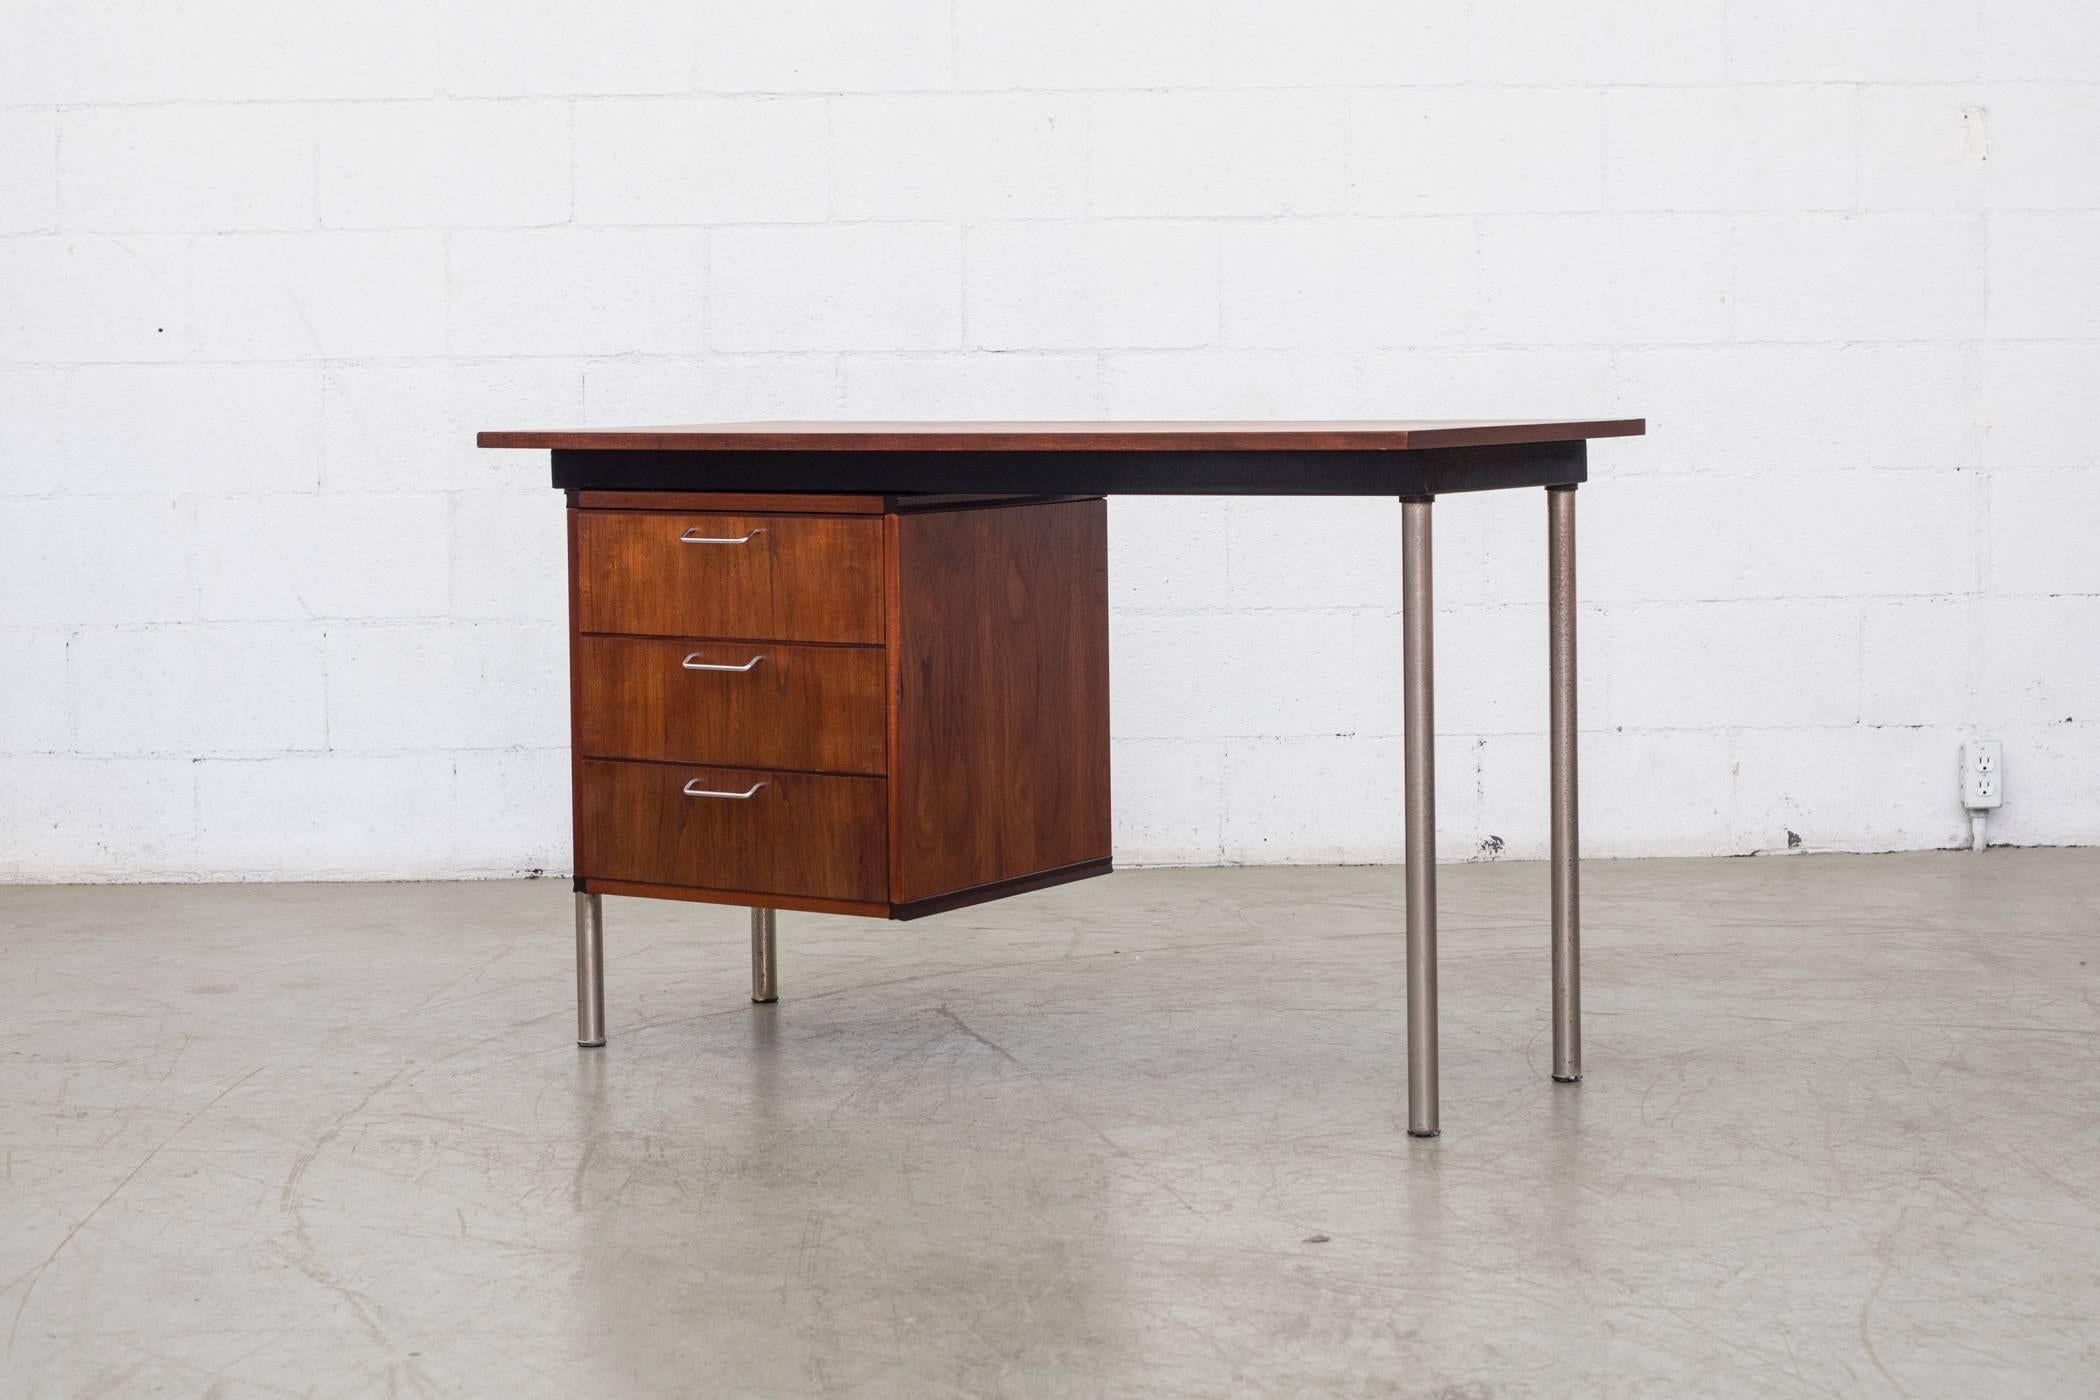 Part of Cees Braakman's 1956 made to measure series for Pastoe this small made to measure teak desk has three drawers with elegantly curved interiors, chrome legs and a decorative black accent. Original condition, wear consistent with age with